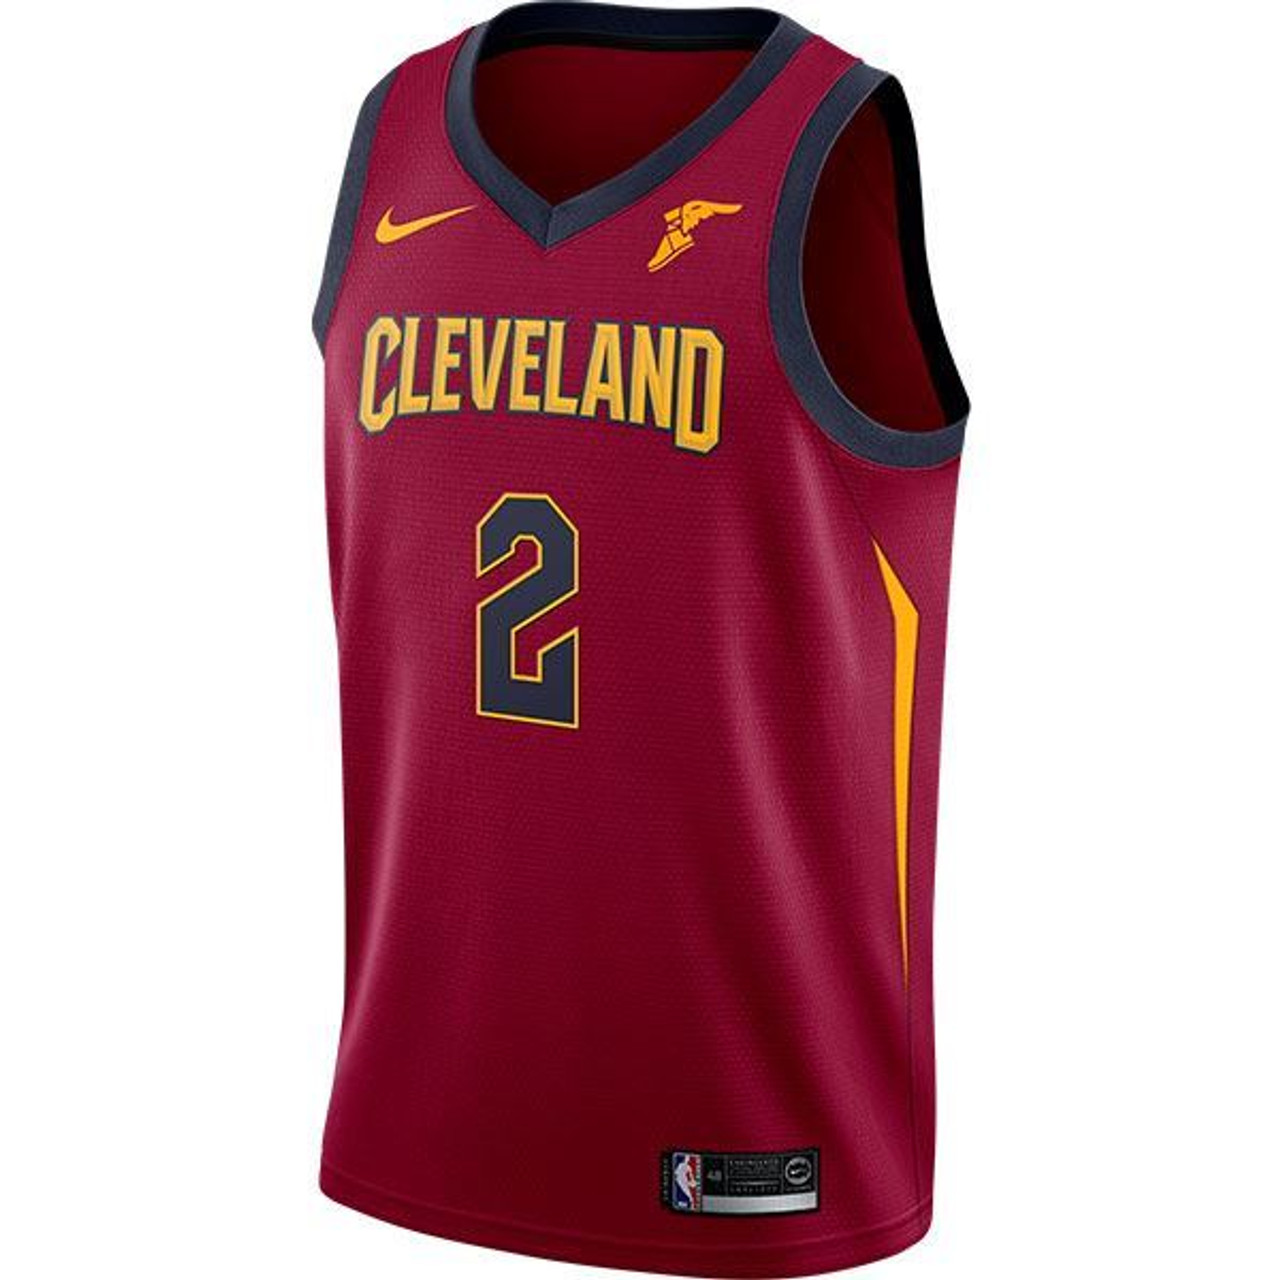 cleveland red jersey